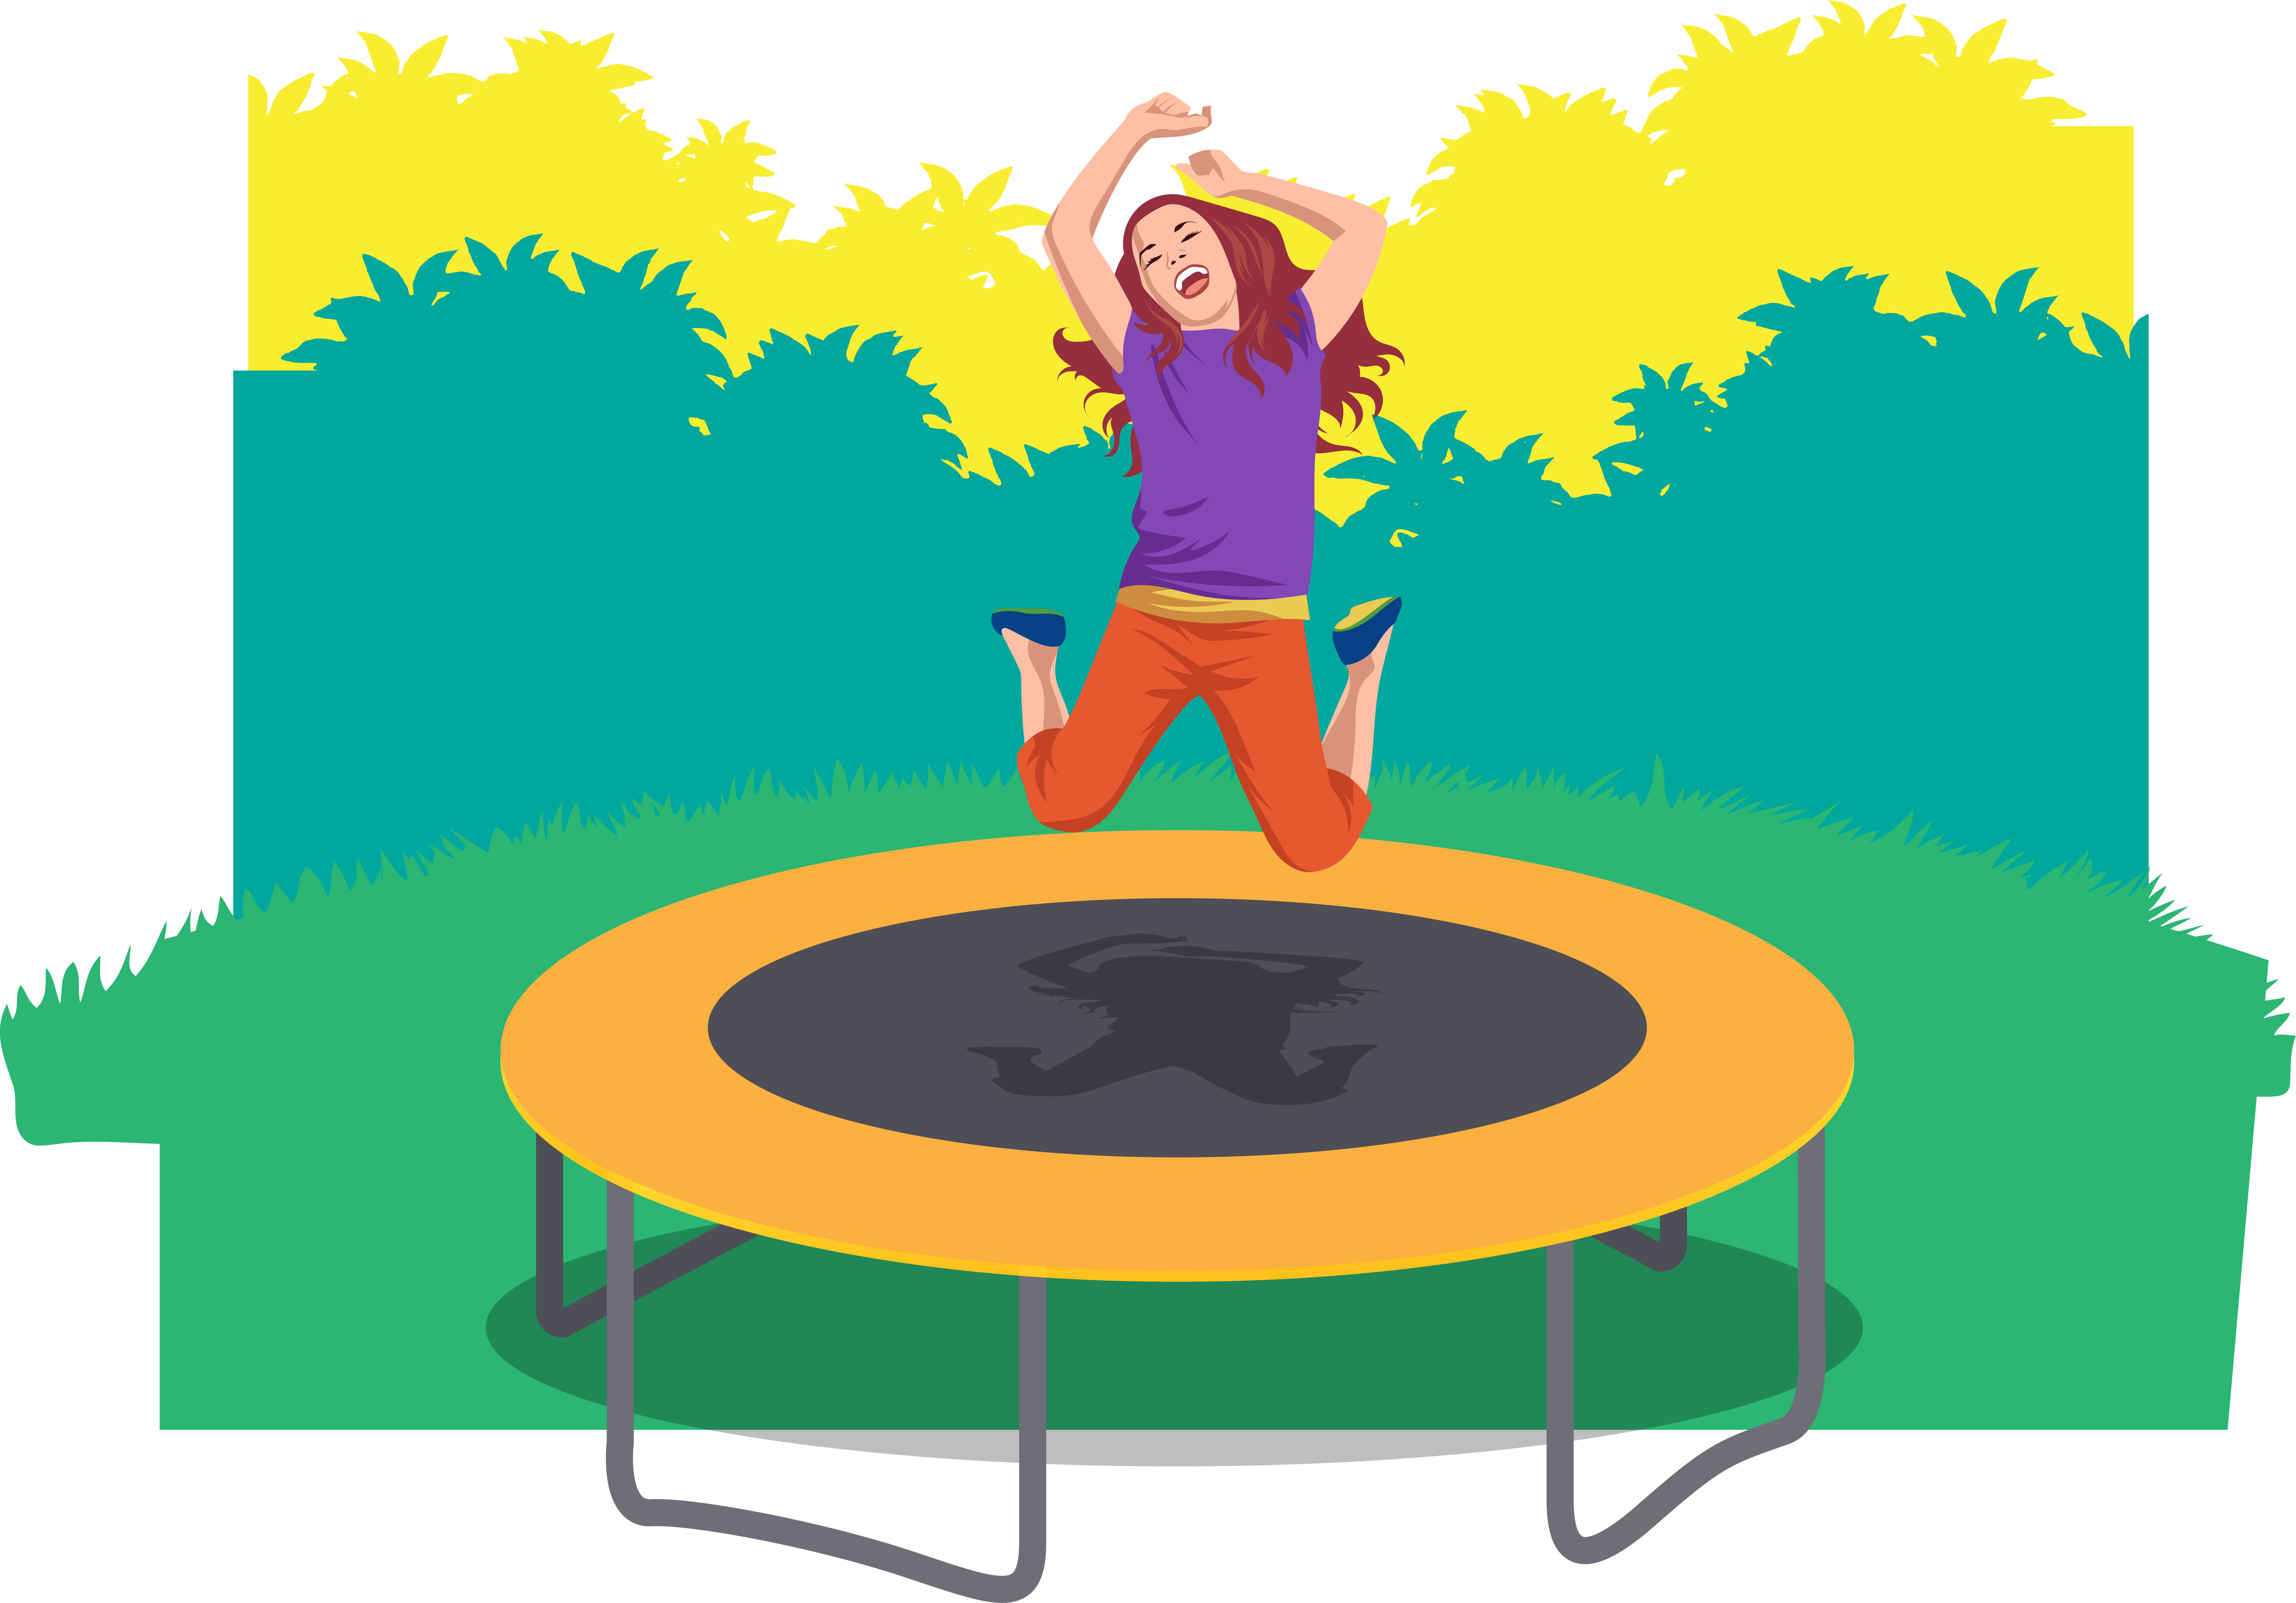 Trampolining people who jump. Jumping clipart gymnastics trampoline